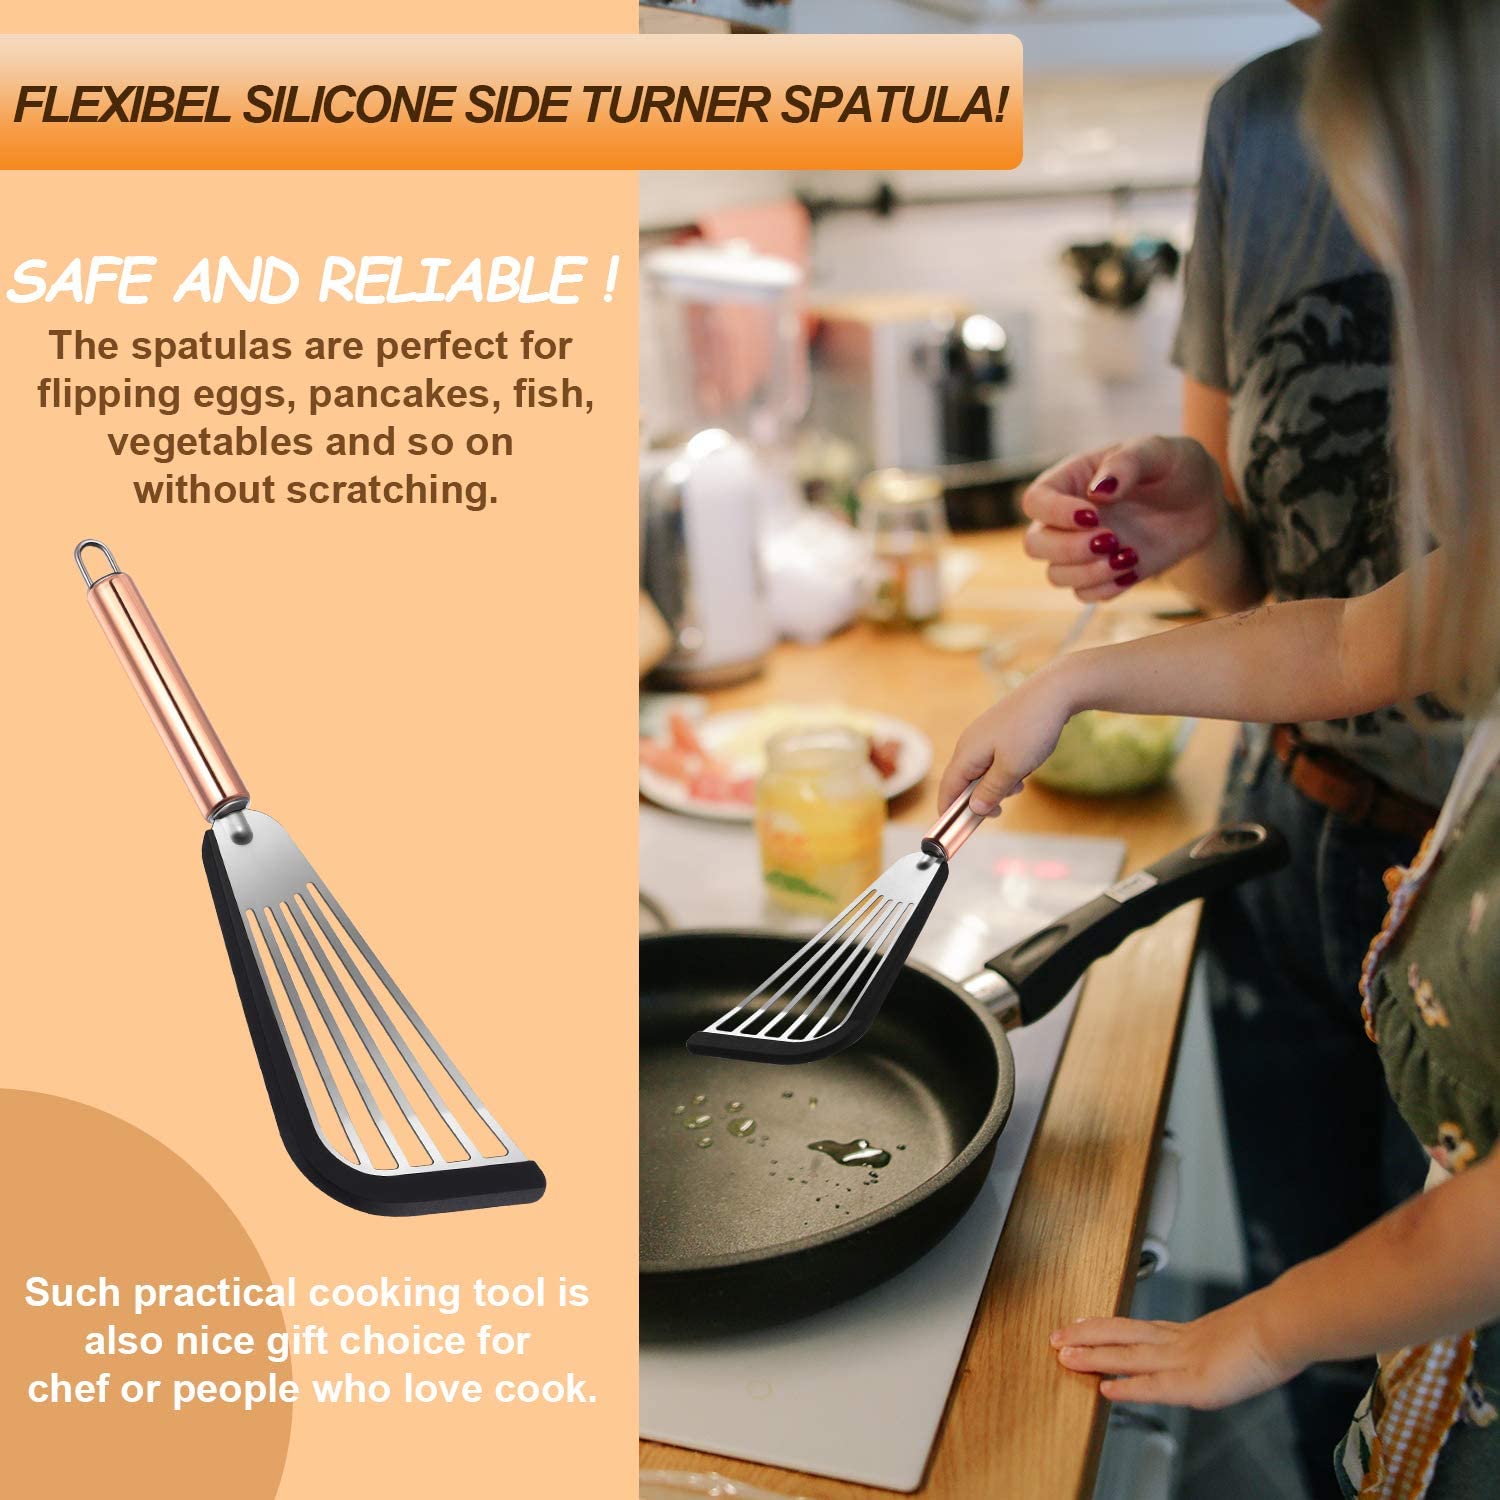 (🔥LAST DAY PROMOTION - SAVE 49% OFF) Nonstick Spatula Turner-BUY 2 GET 1 FREE